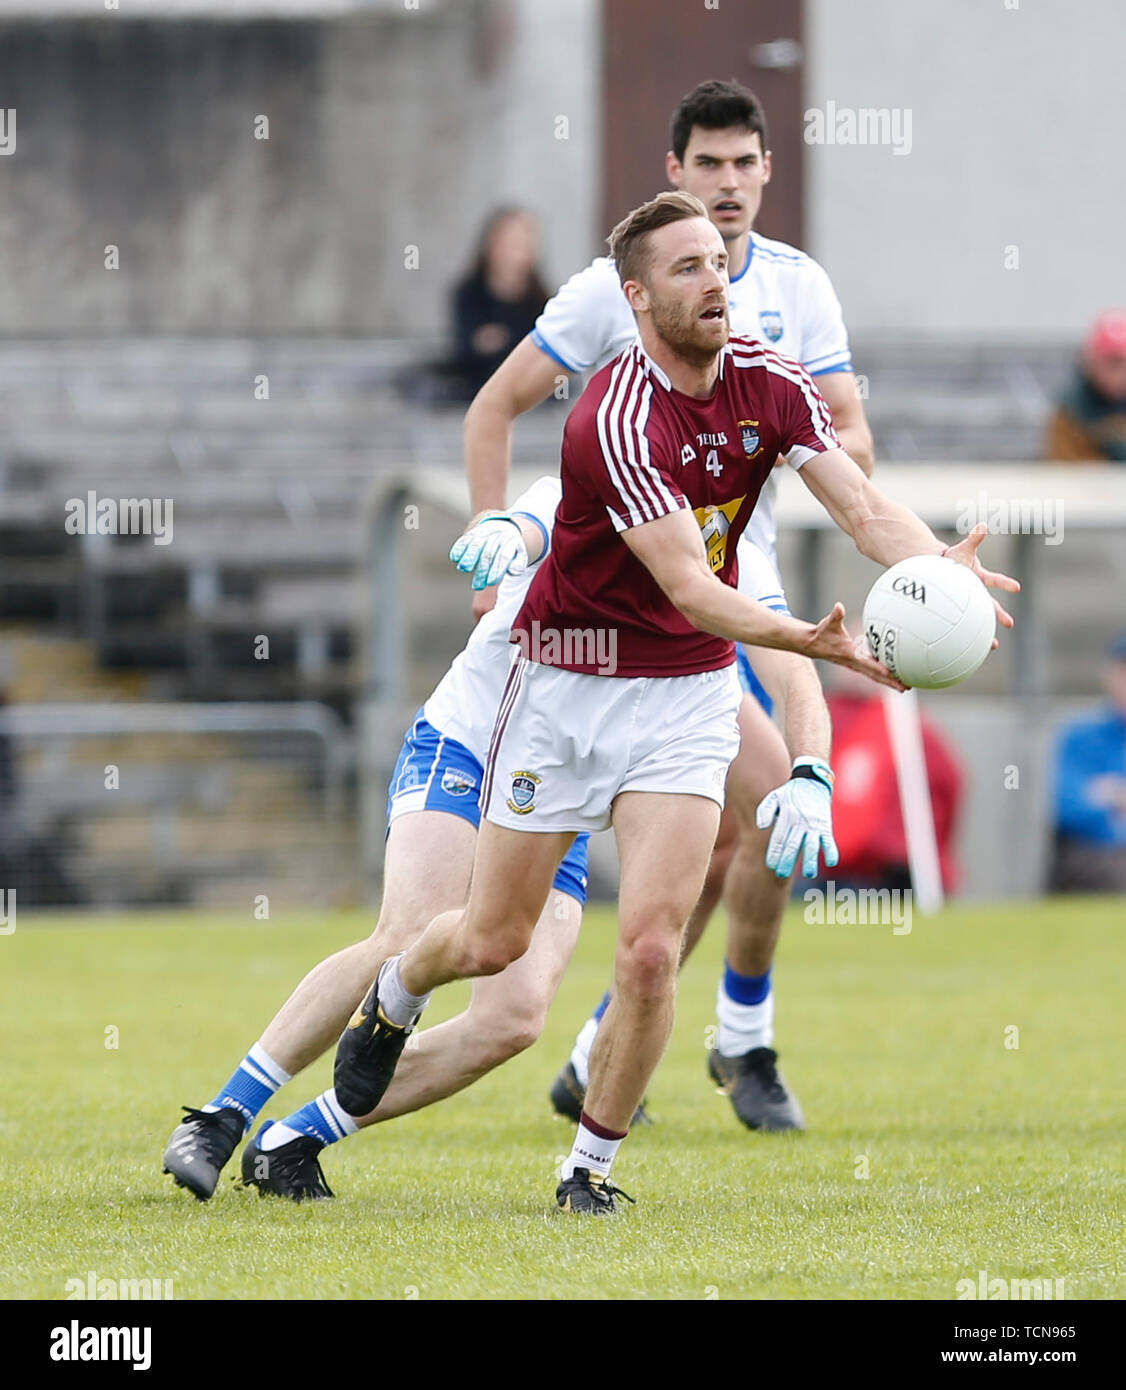 Mullingar, Co Westmeath, Ireland. 9th June 2019. 9th June 2019, TEG Cusack Park, Mullingar, Co Westmeath, Ireland; GAA All Ireland Senior Football Championship Qualifier, Round 1, Westmeath versus Waterford; Kevin Maguire brings the ball forward for Westmeath Stock Photo